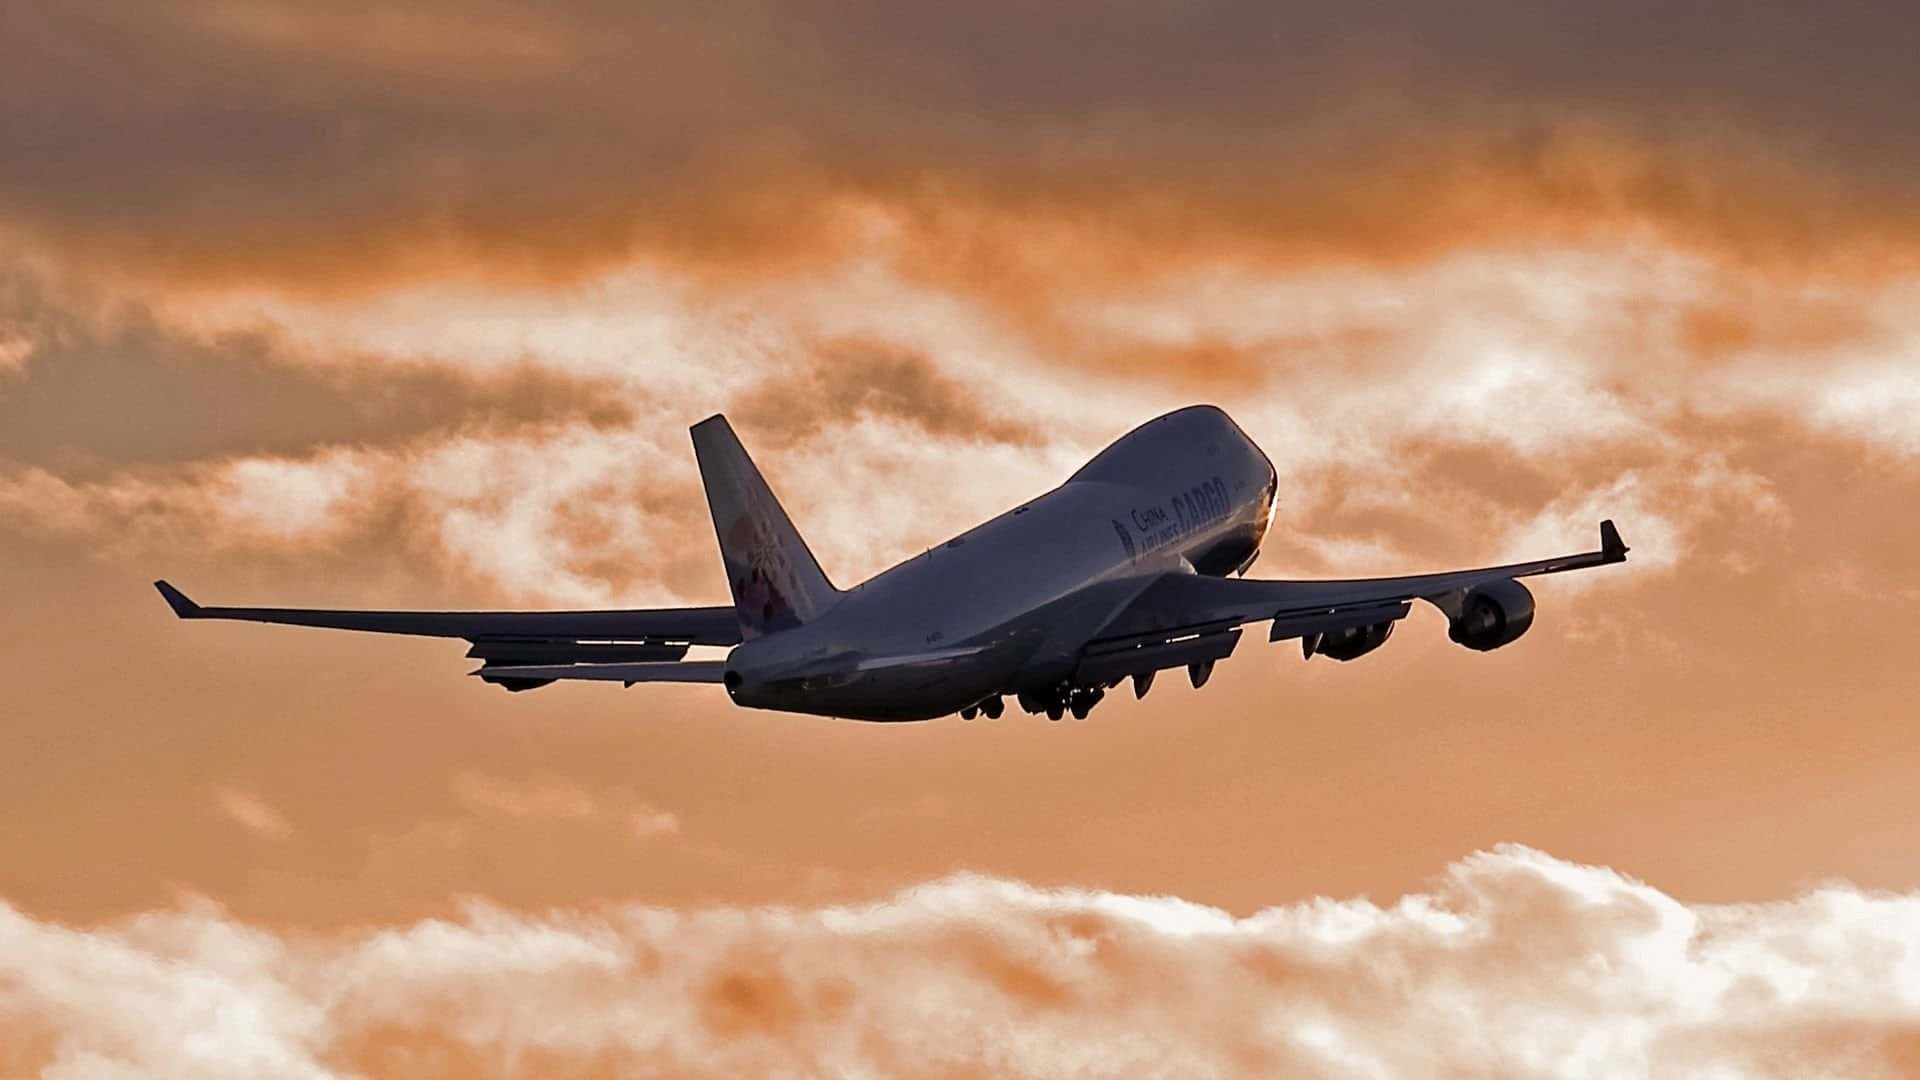 “climb Aboard A Classic: A Boeing 747 Airliner In Flight”